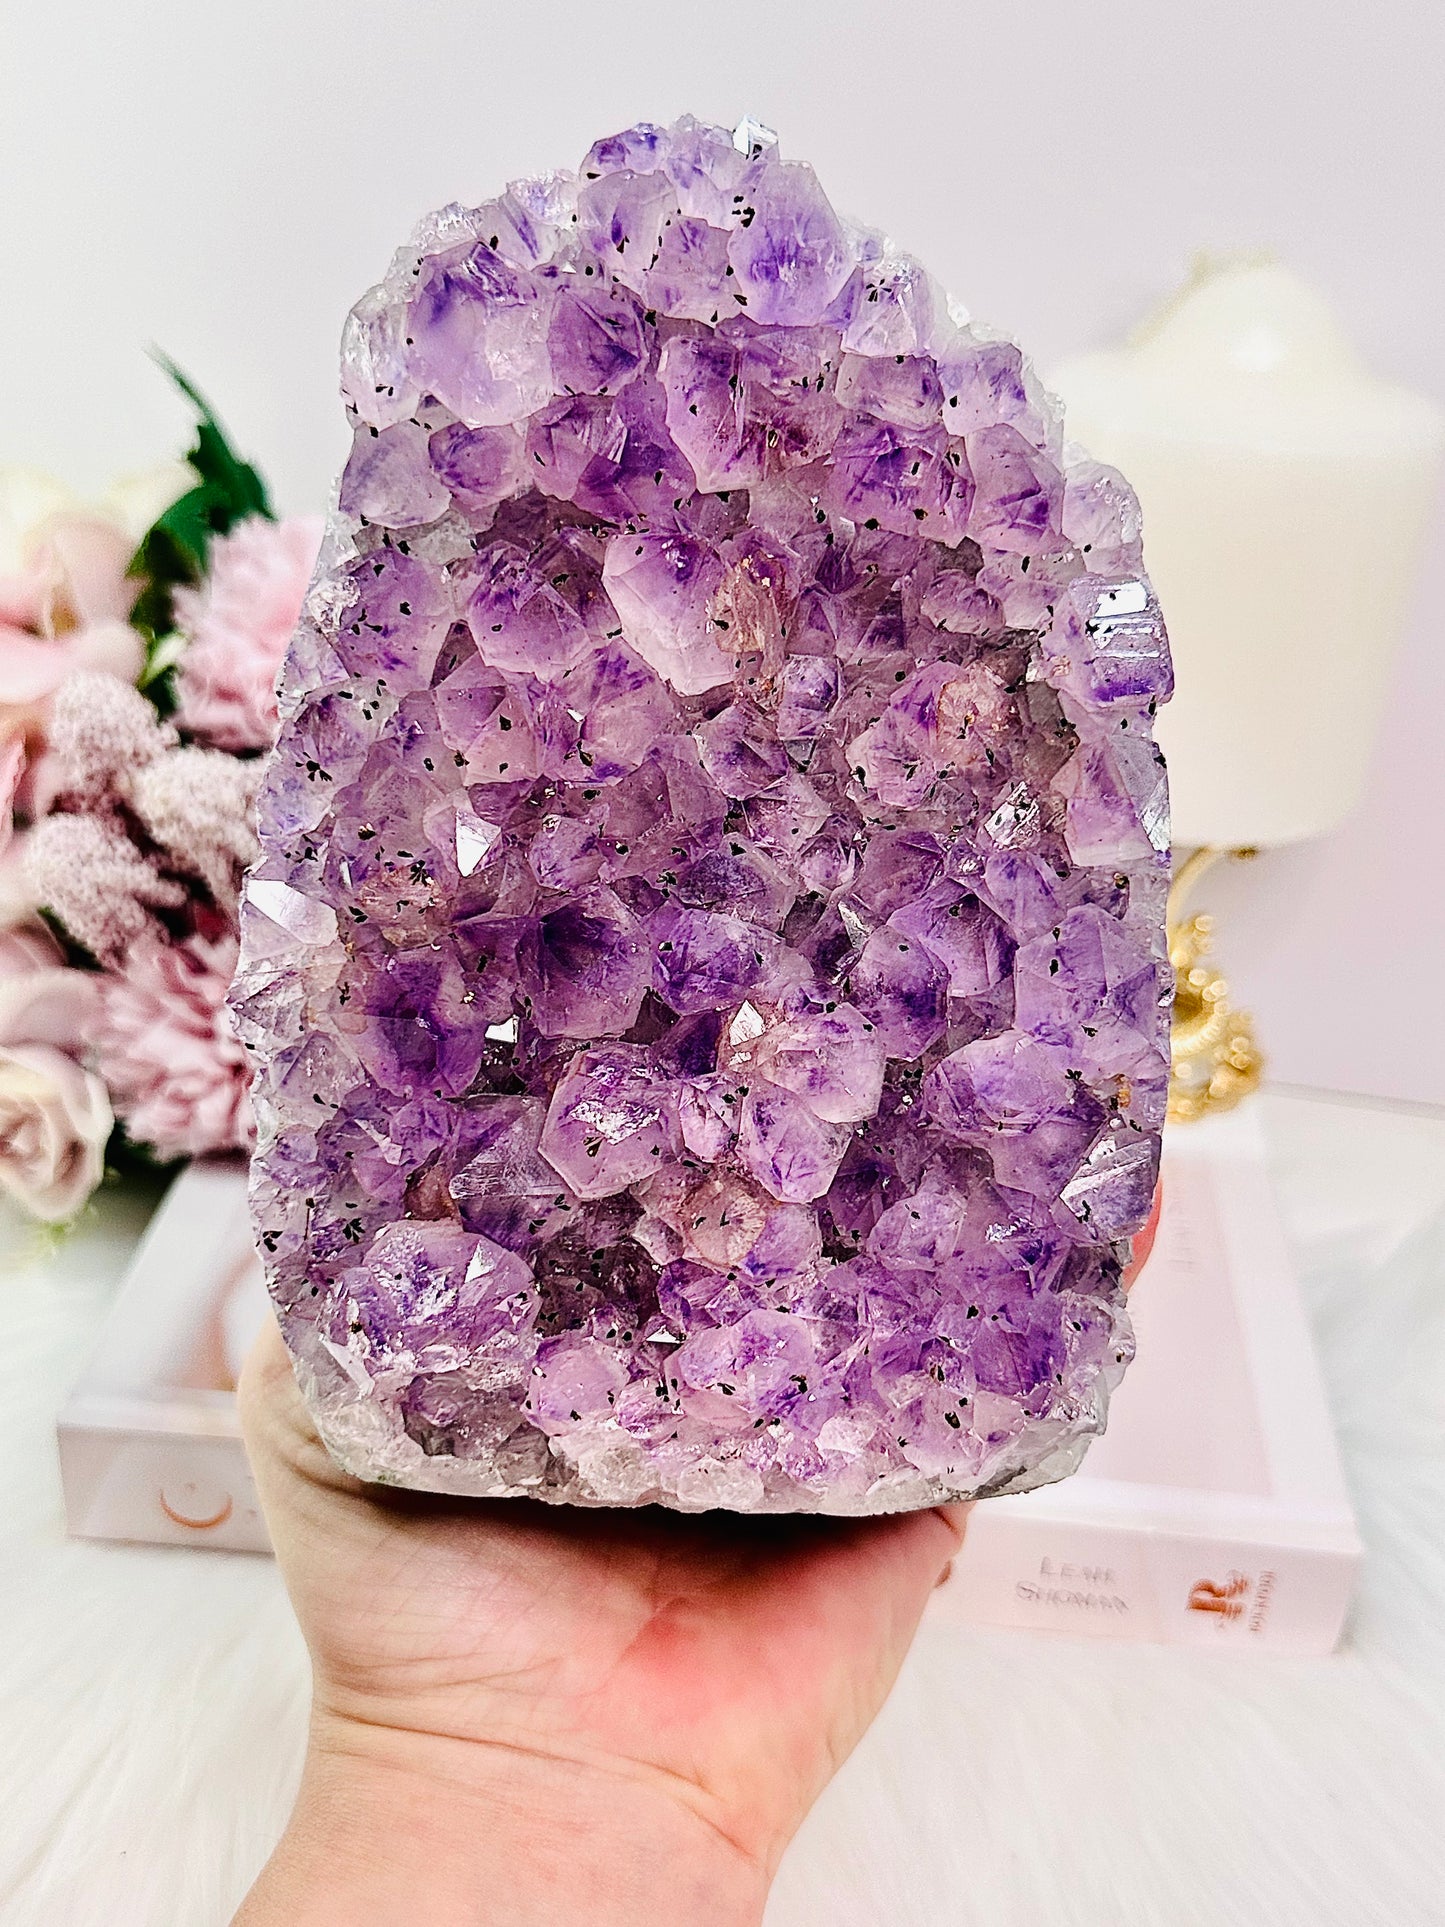 Wow! Stunning Large 1.78KG 15.5cm Amethyst Base Cut Cluster Freeform From Brazil Absolutely Gorgeous